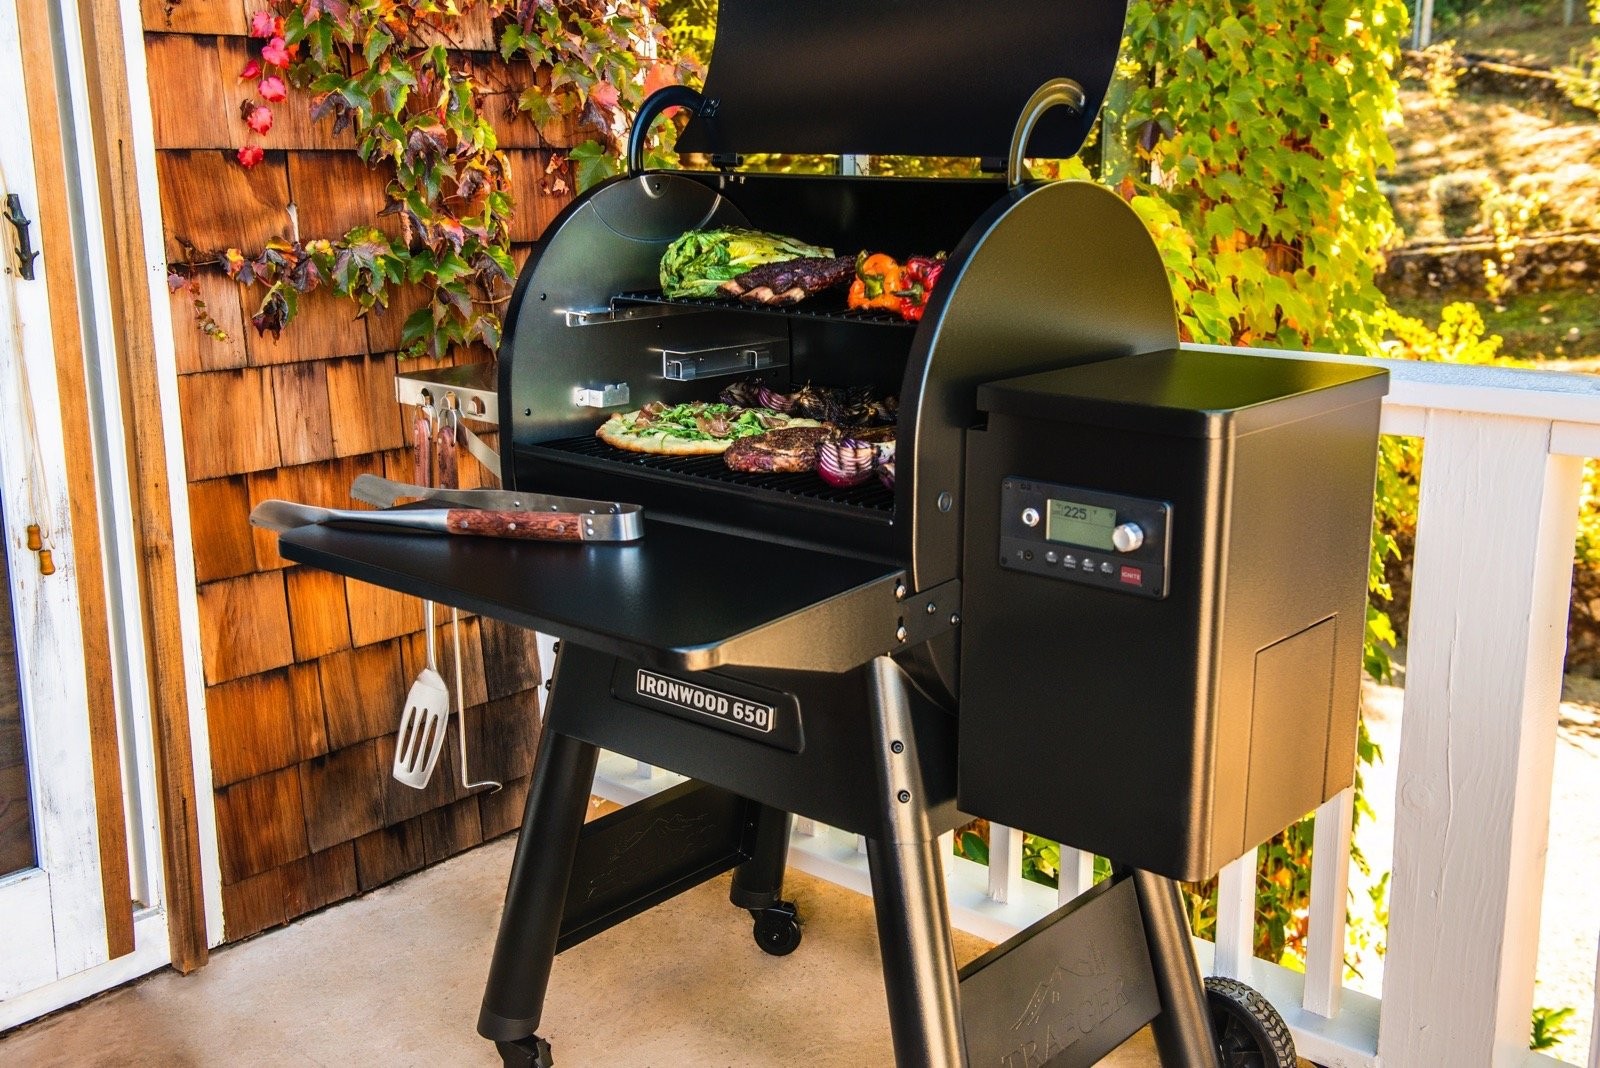 Traeger s 2019 grill lineup